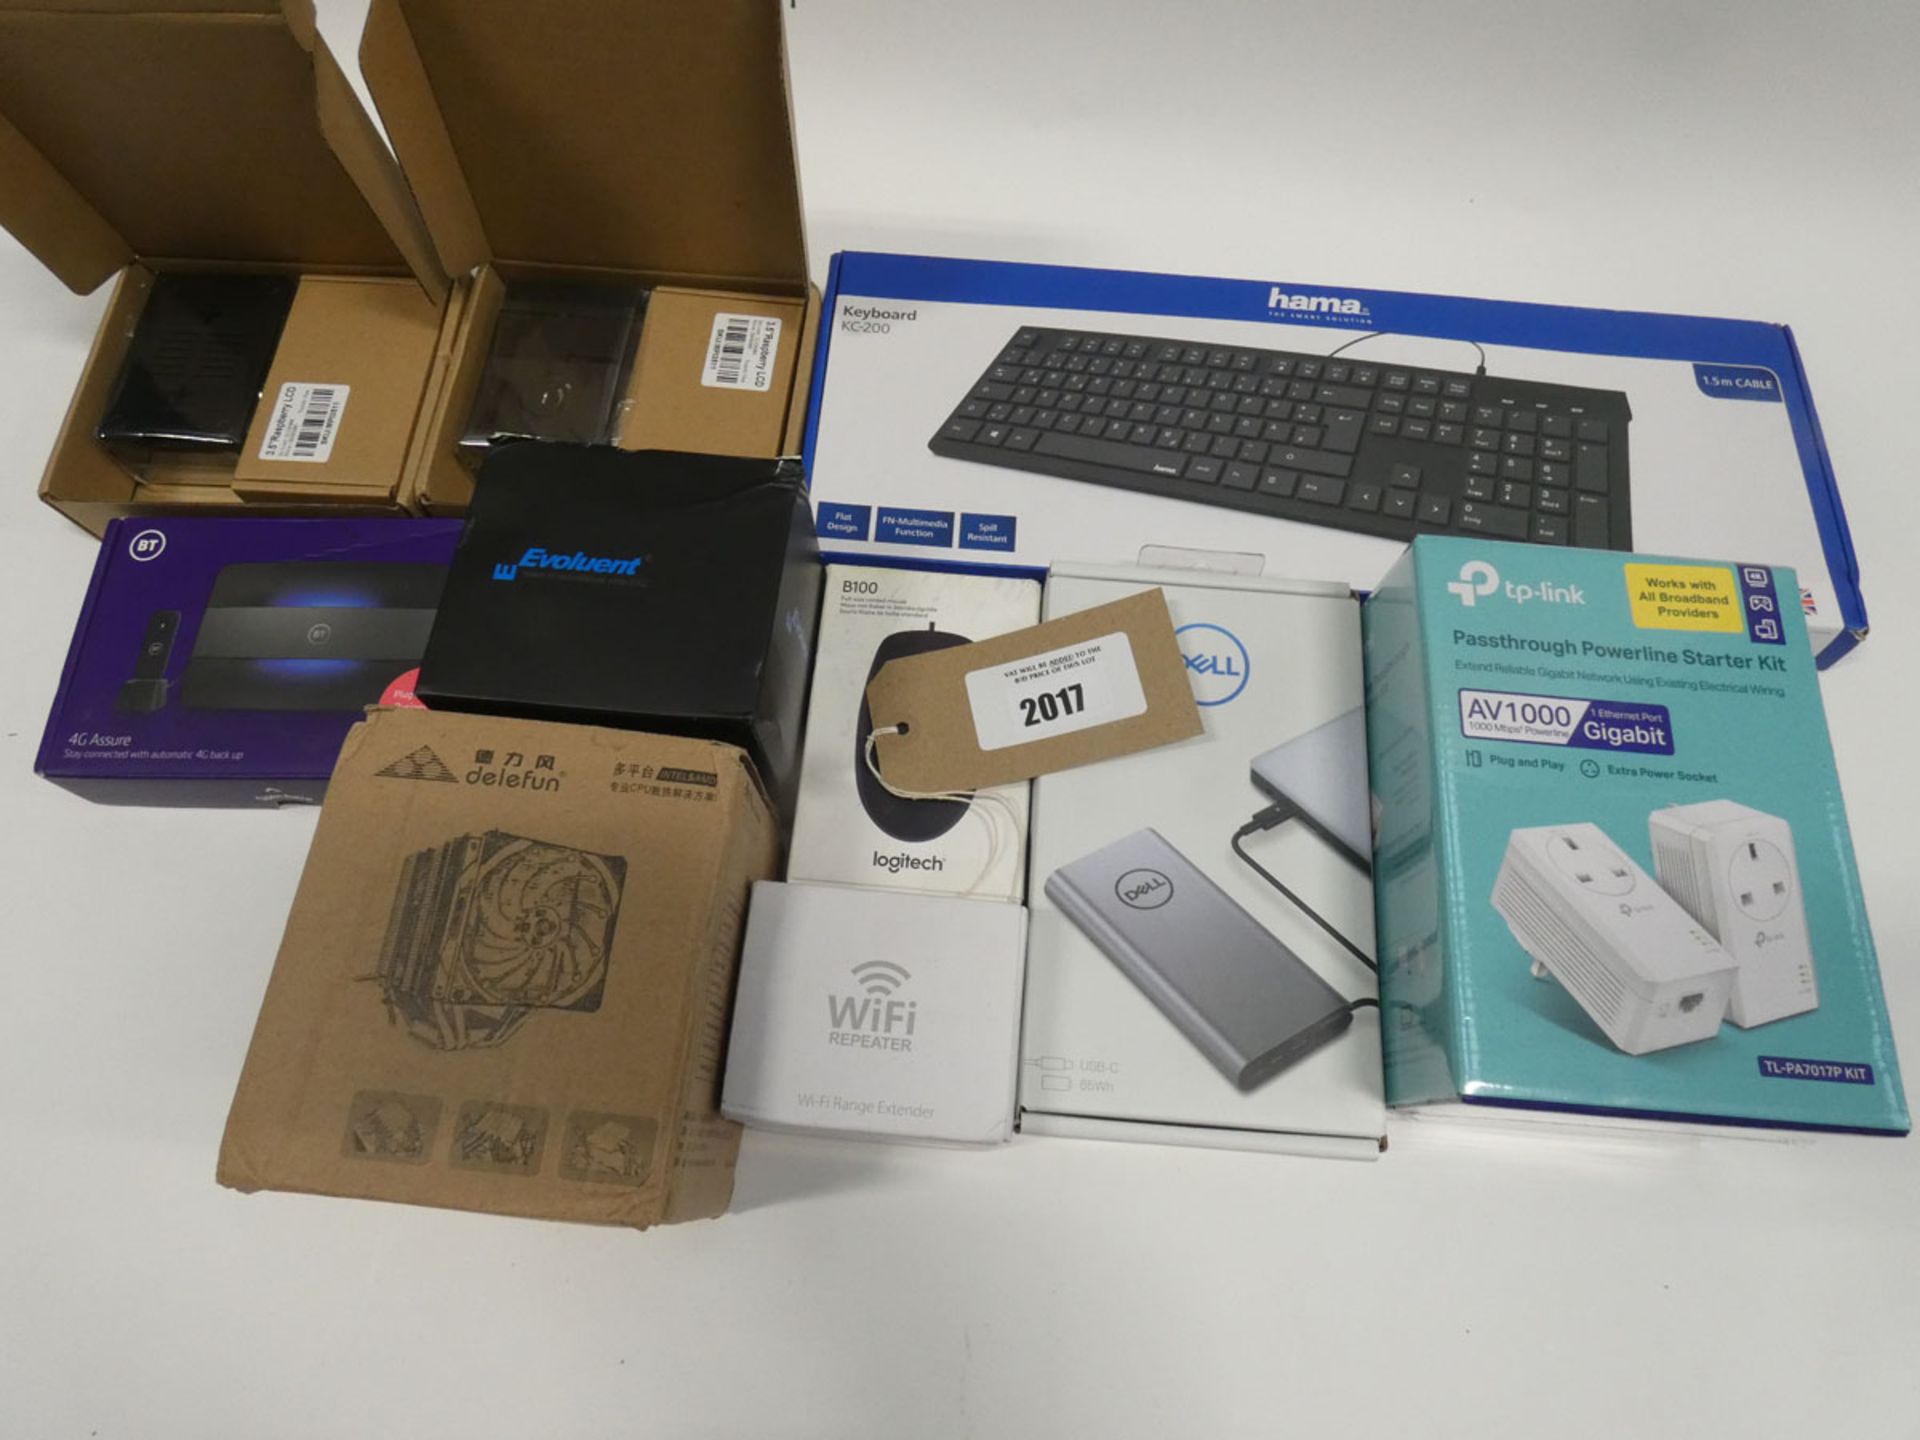 Bag containing Raspberry Pi kits, Hama keyboard, TP-Link wireless extender, BT 4G Assure dongle,